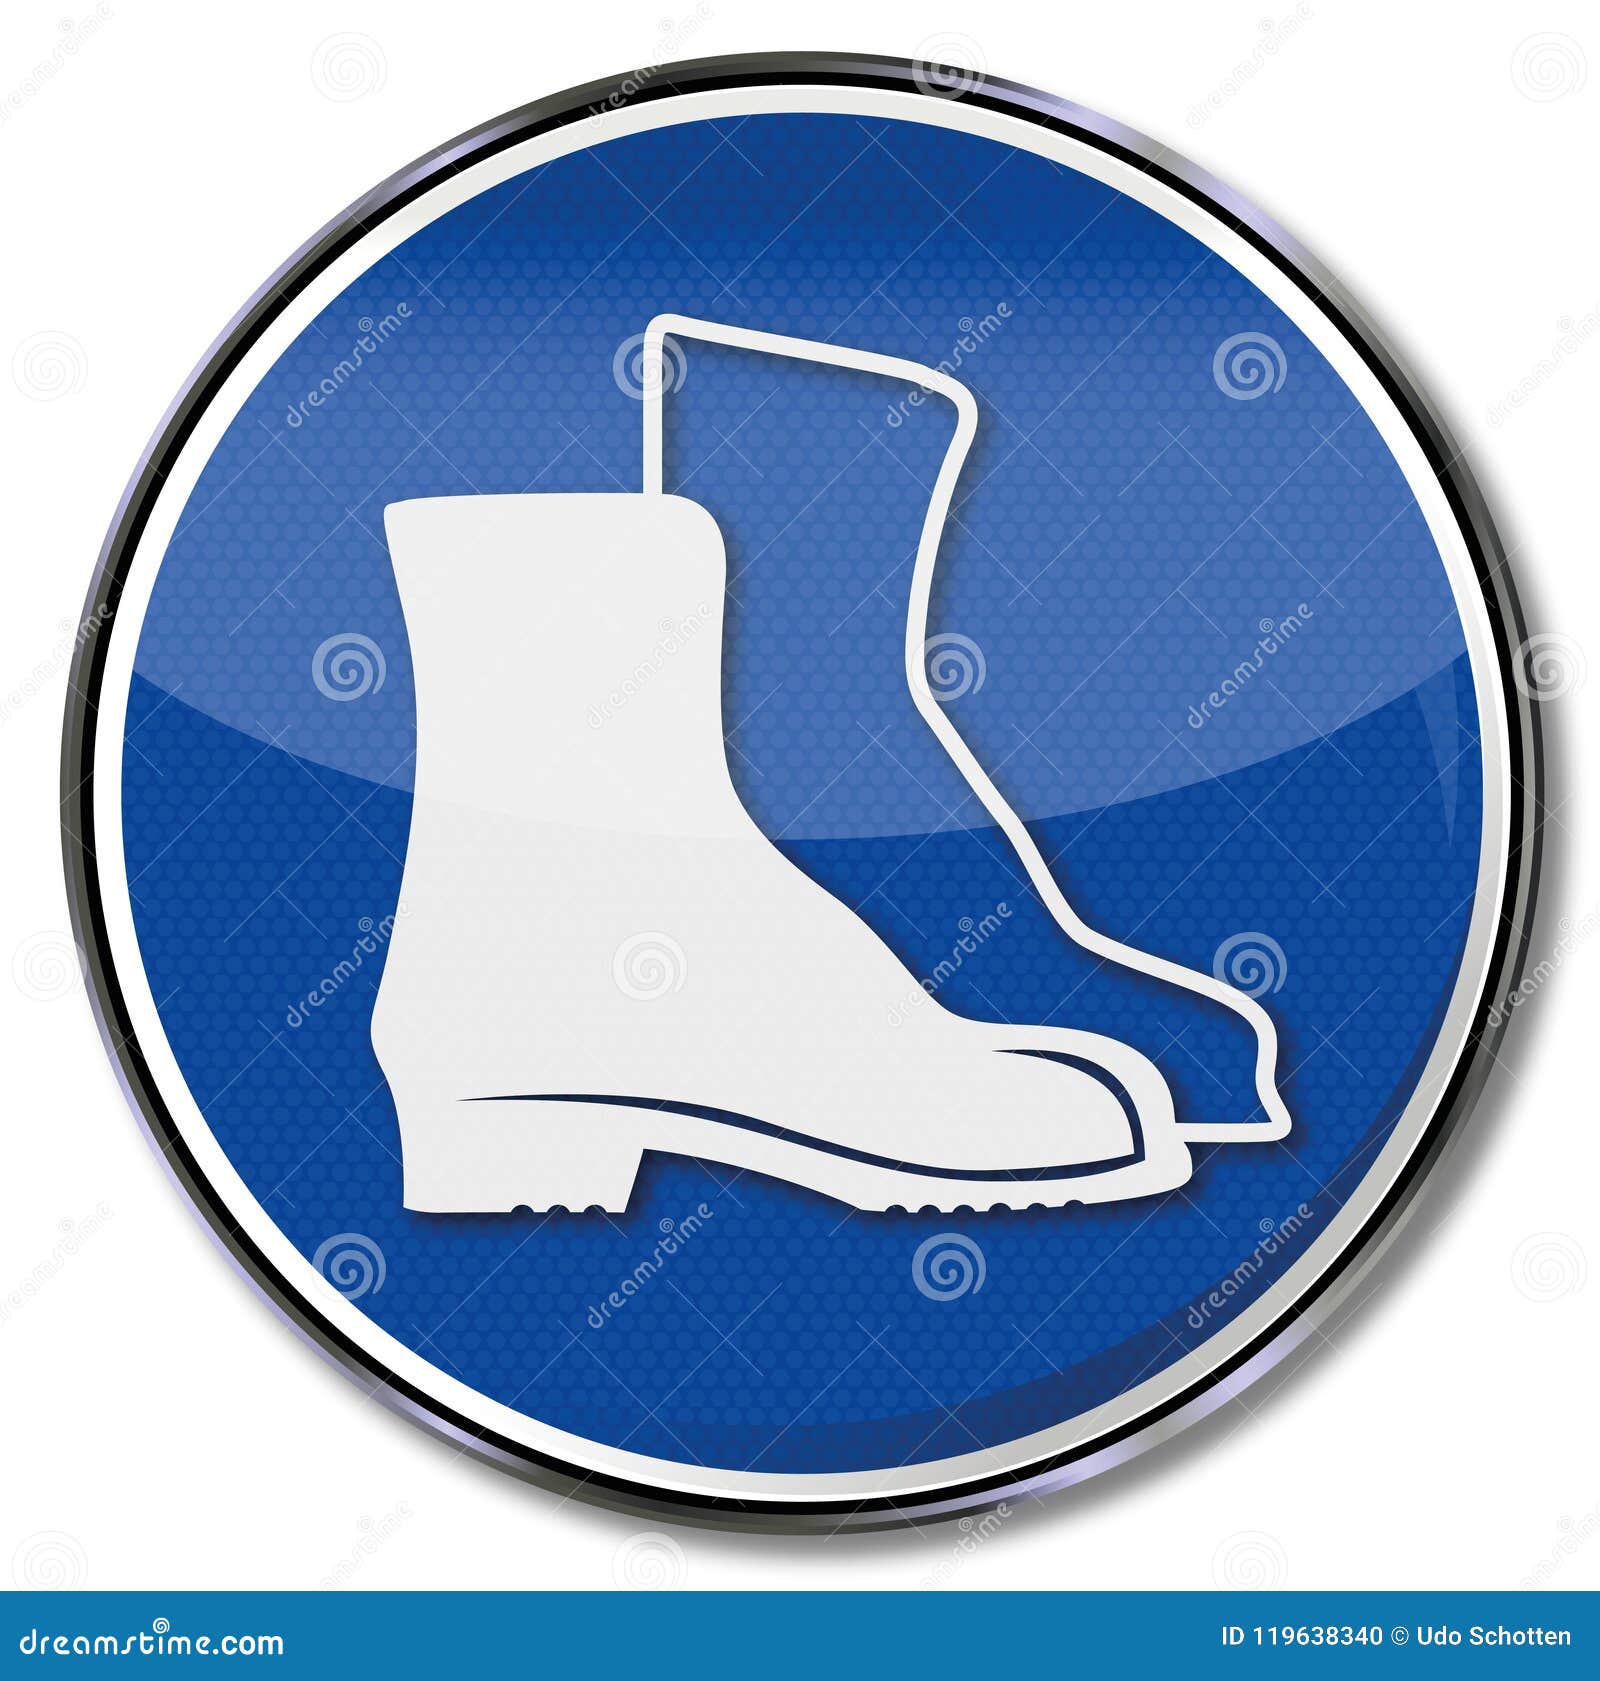 Always wear safety shoes stock vector. Illustration of devices - 119638340